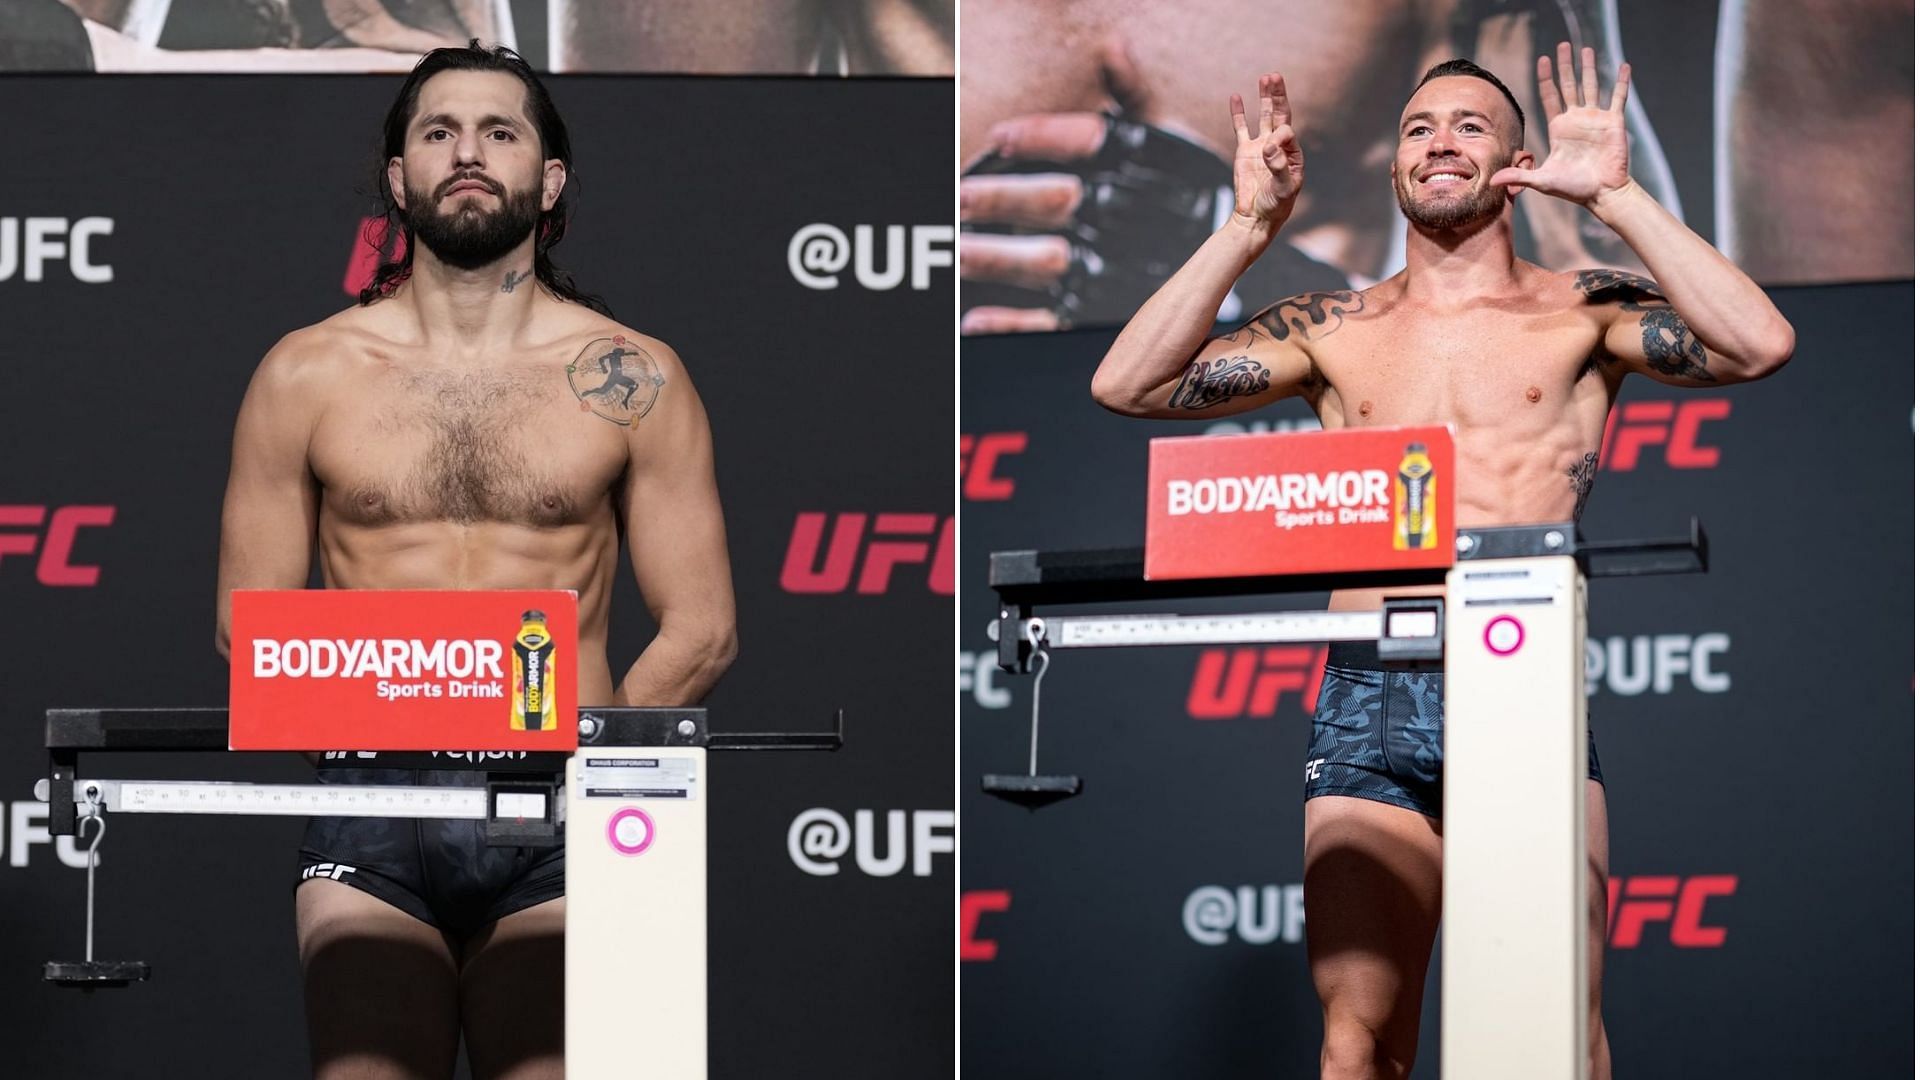 Jorge Masvidal [left] and Colby Covington [right] (Images courtesy of @ufc IG)